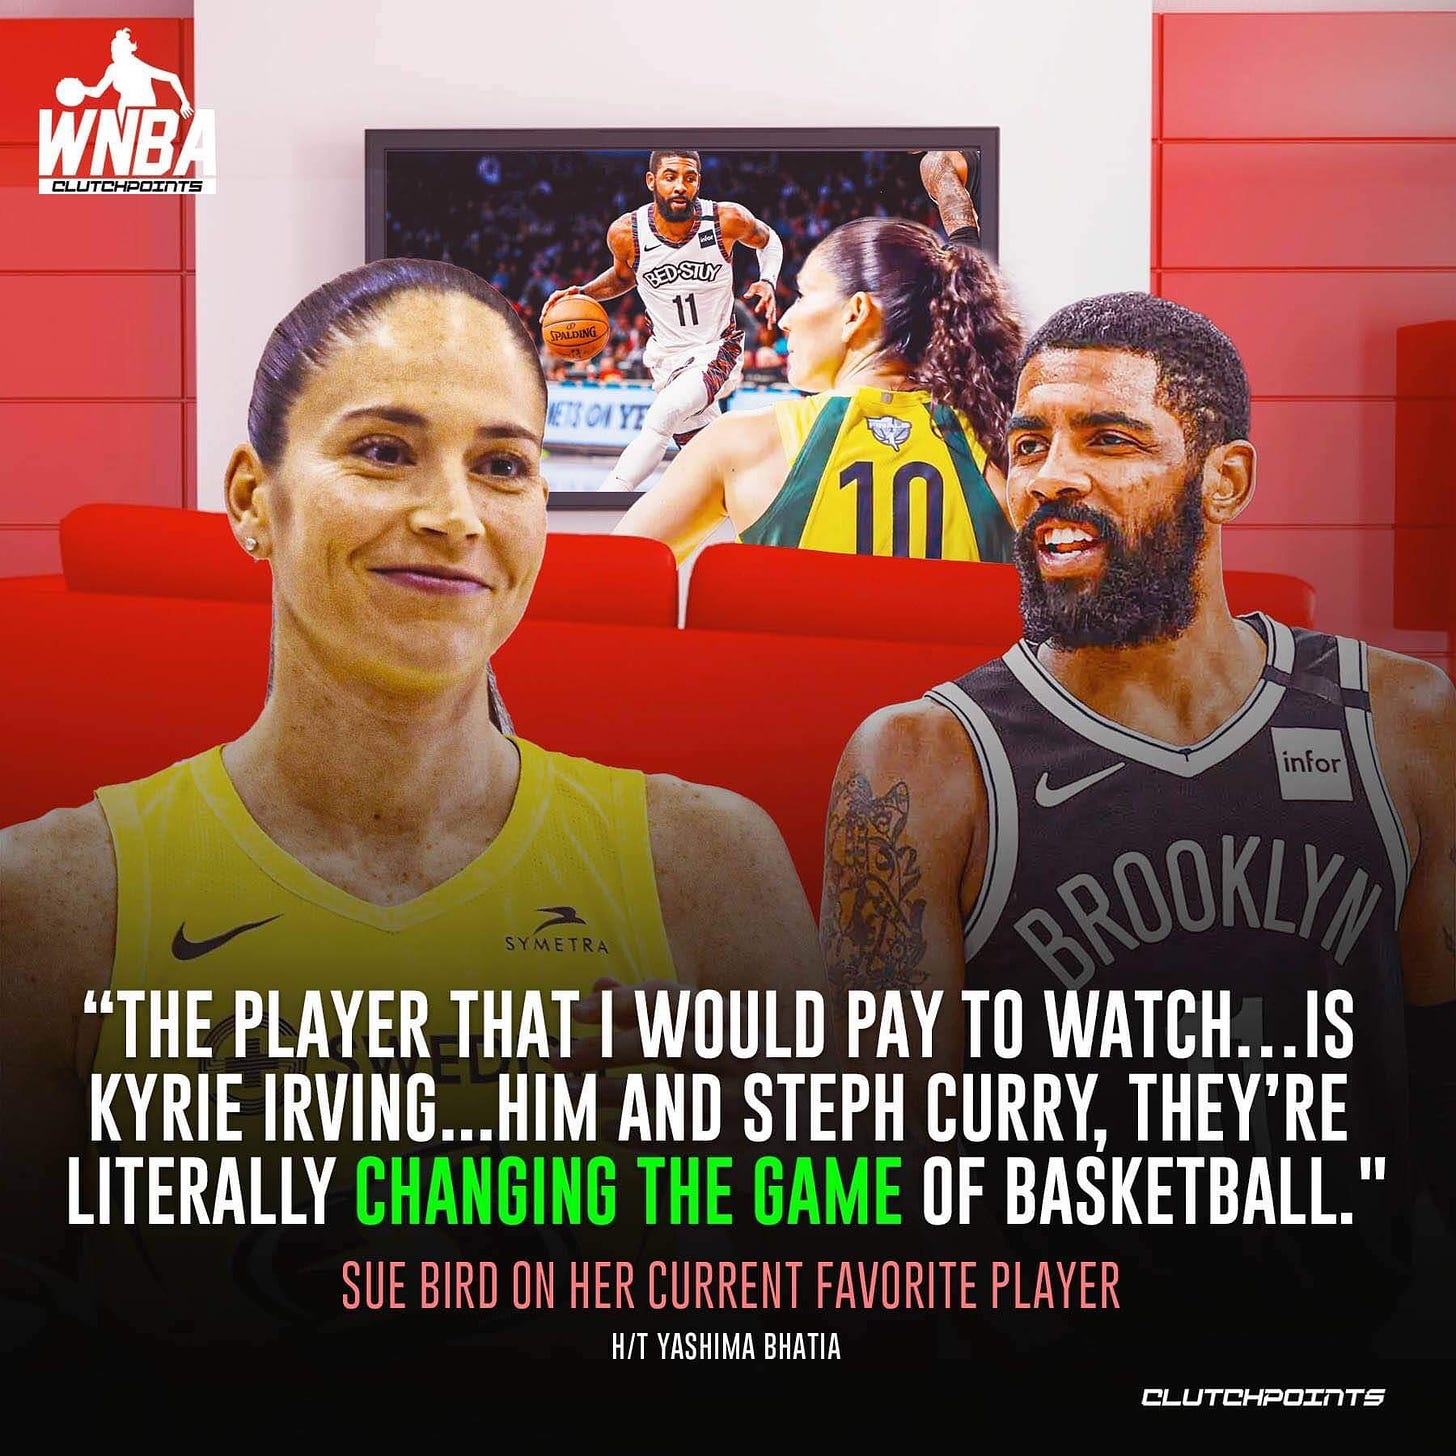 May be an image of 3 people and text that says 'WNB CLUTCHPOINTS BED-STUY 11 ETSOLYT 10 "THE PLAYER THAT WOULD PAY TO WATCH...IS KYRIE IRVING...HIM .HIM AND STEPH CURRY, THEY'RE LITERALLY CHANGING THE GAME OF BASKETBALL." SUE BIRD ON HER FAVORITE PLAYER H/T YASHIMA BHATIA CLUTCHPOINTS'